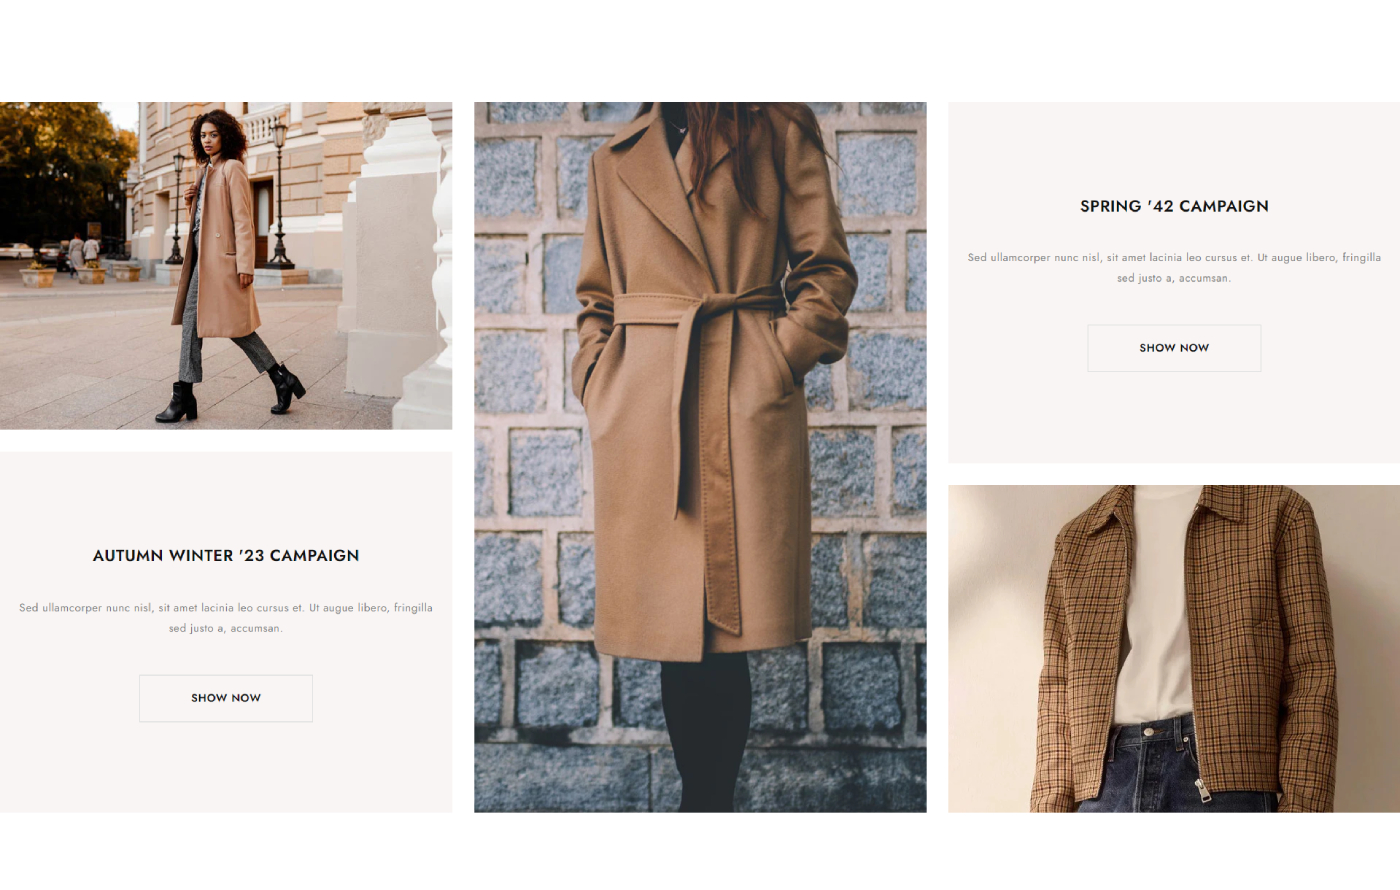 Coatify - Coats Jackets Store Shopify template built by Pagefly